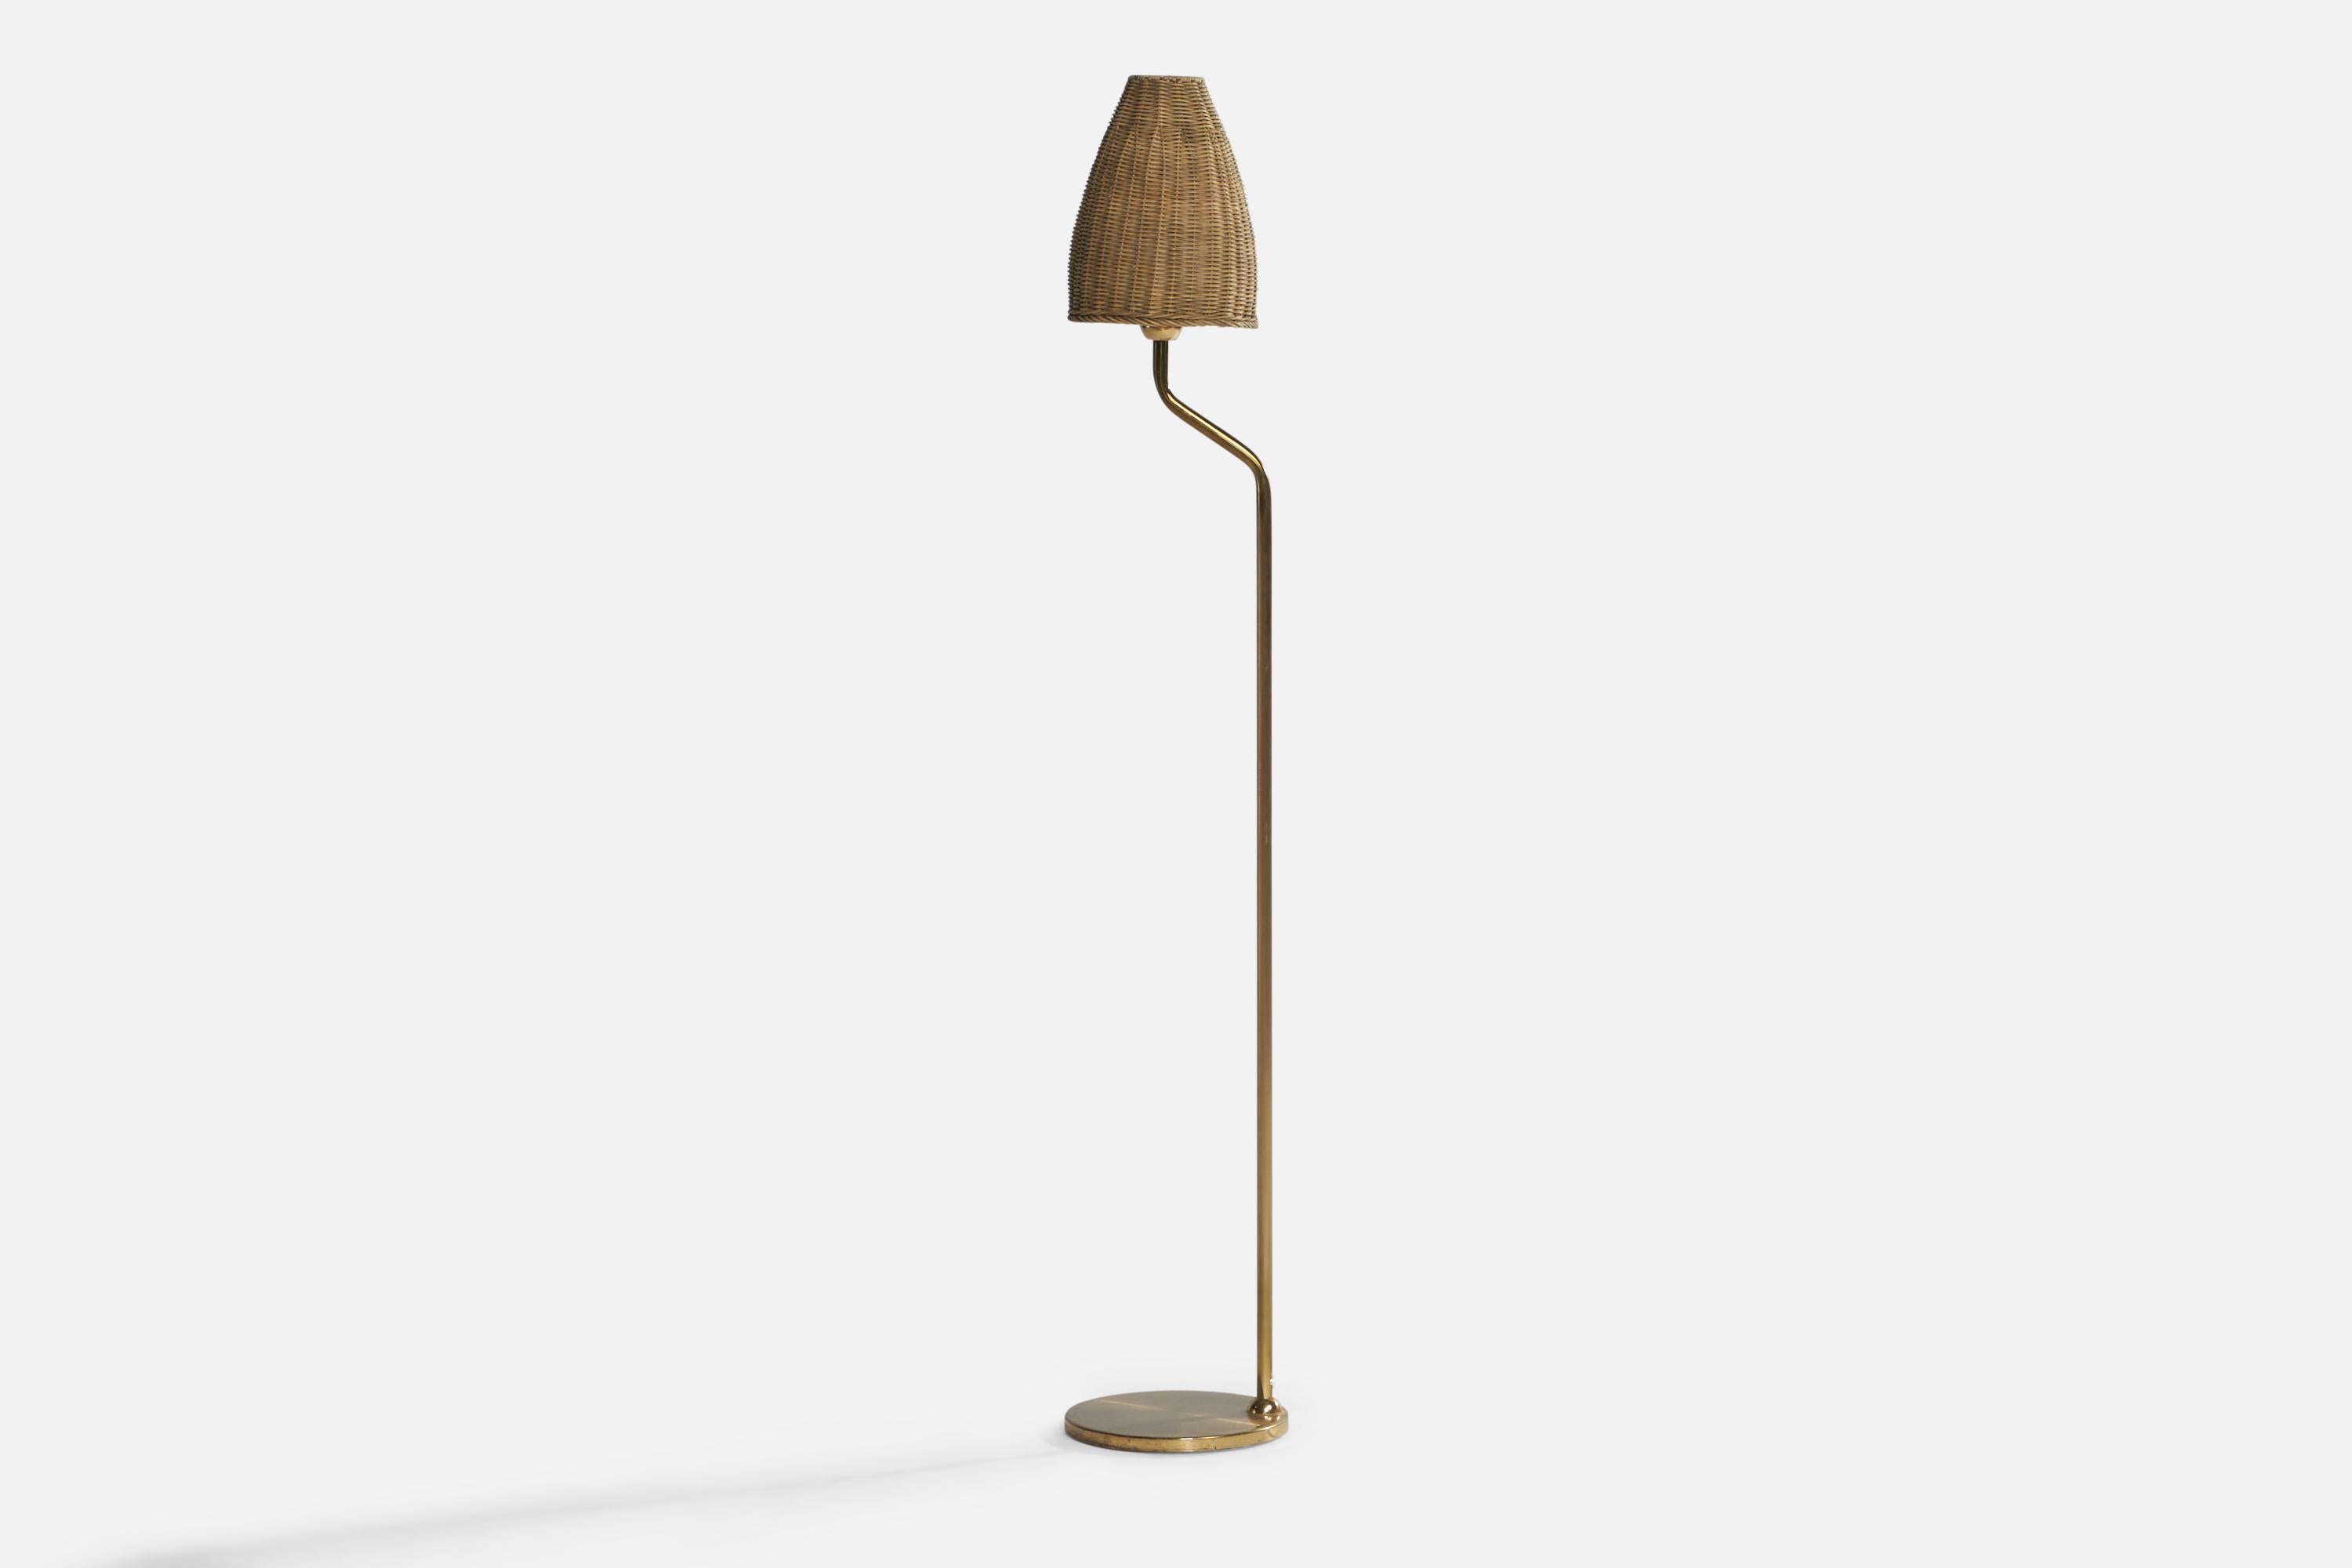 A brass and rattan floor lamp designed and produced by Nya Öia, Sweden, c. 1970s.

Overall Dimensions (inches): 51.75” H x 8.7” Diameter. Stated dimensions include shade.
Bulb Specifications: E-26 Bulb
Number of Sockets: 1
All lighting will be